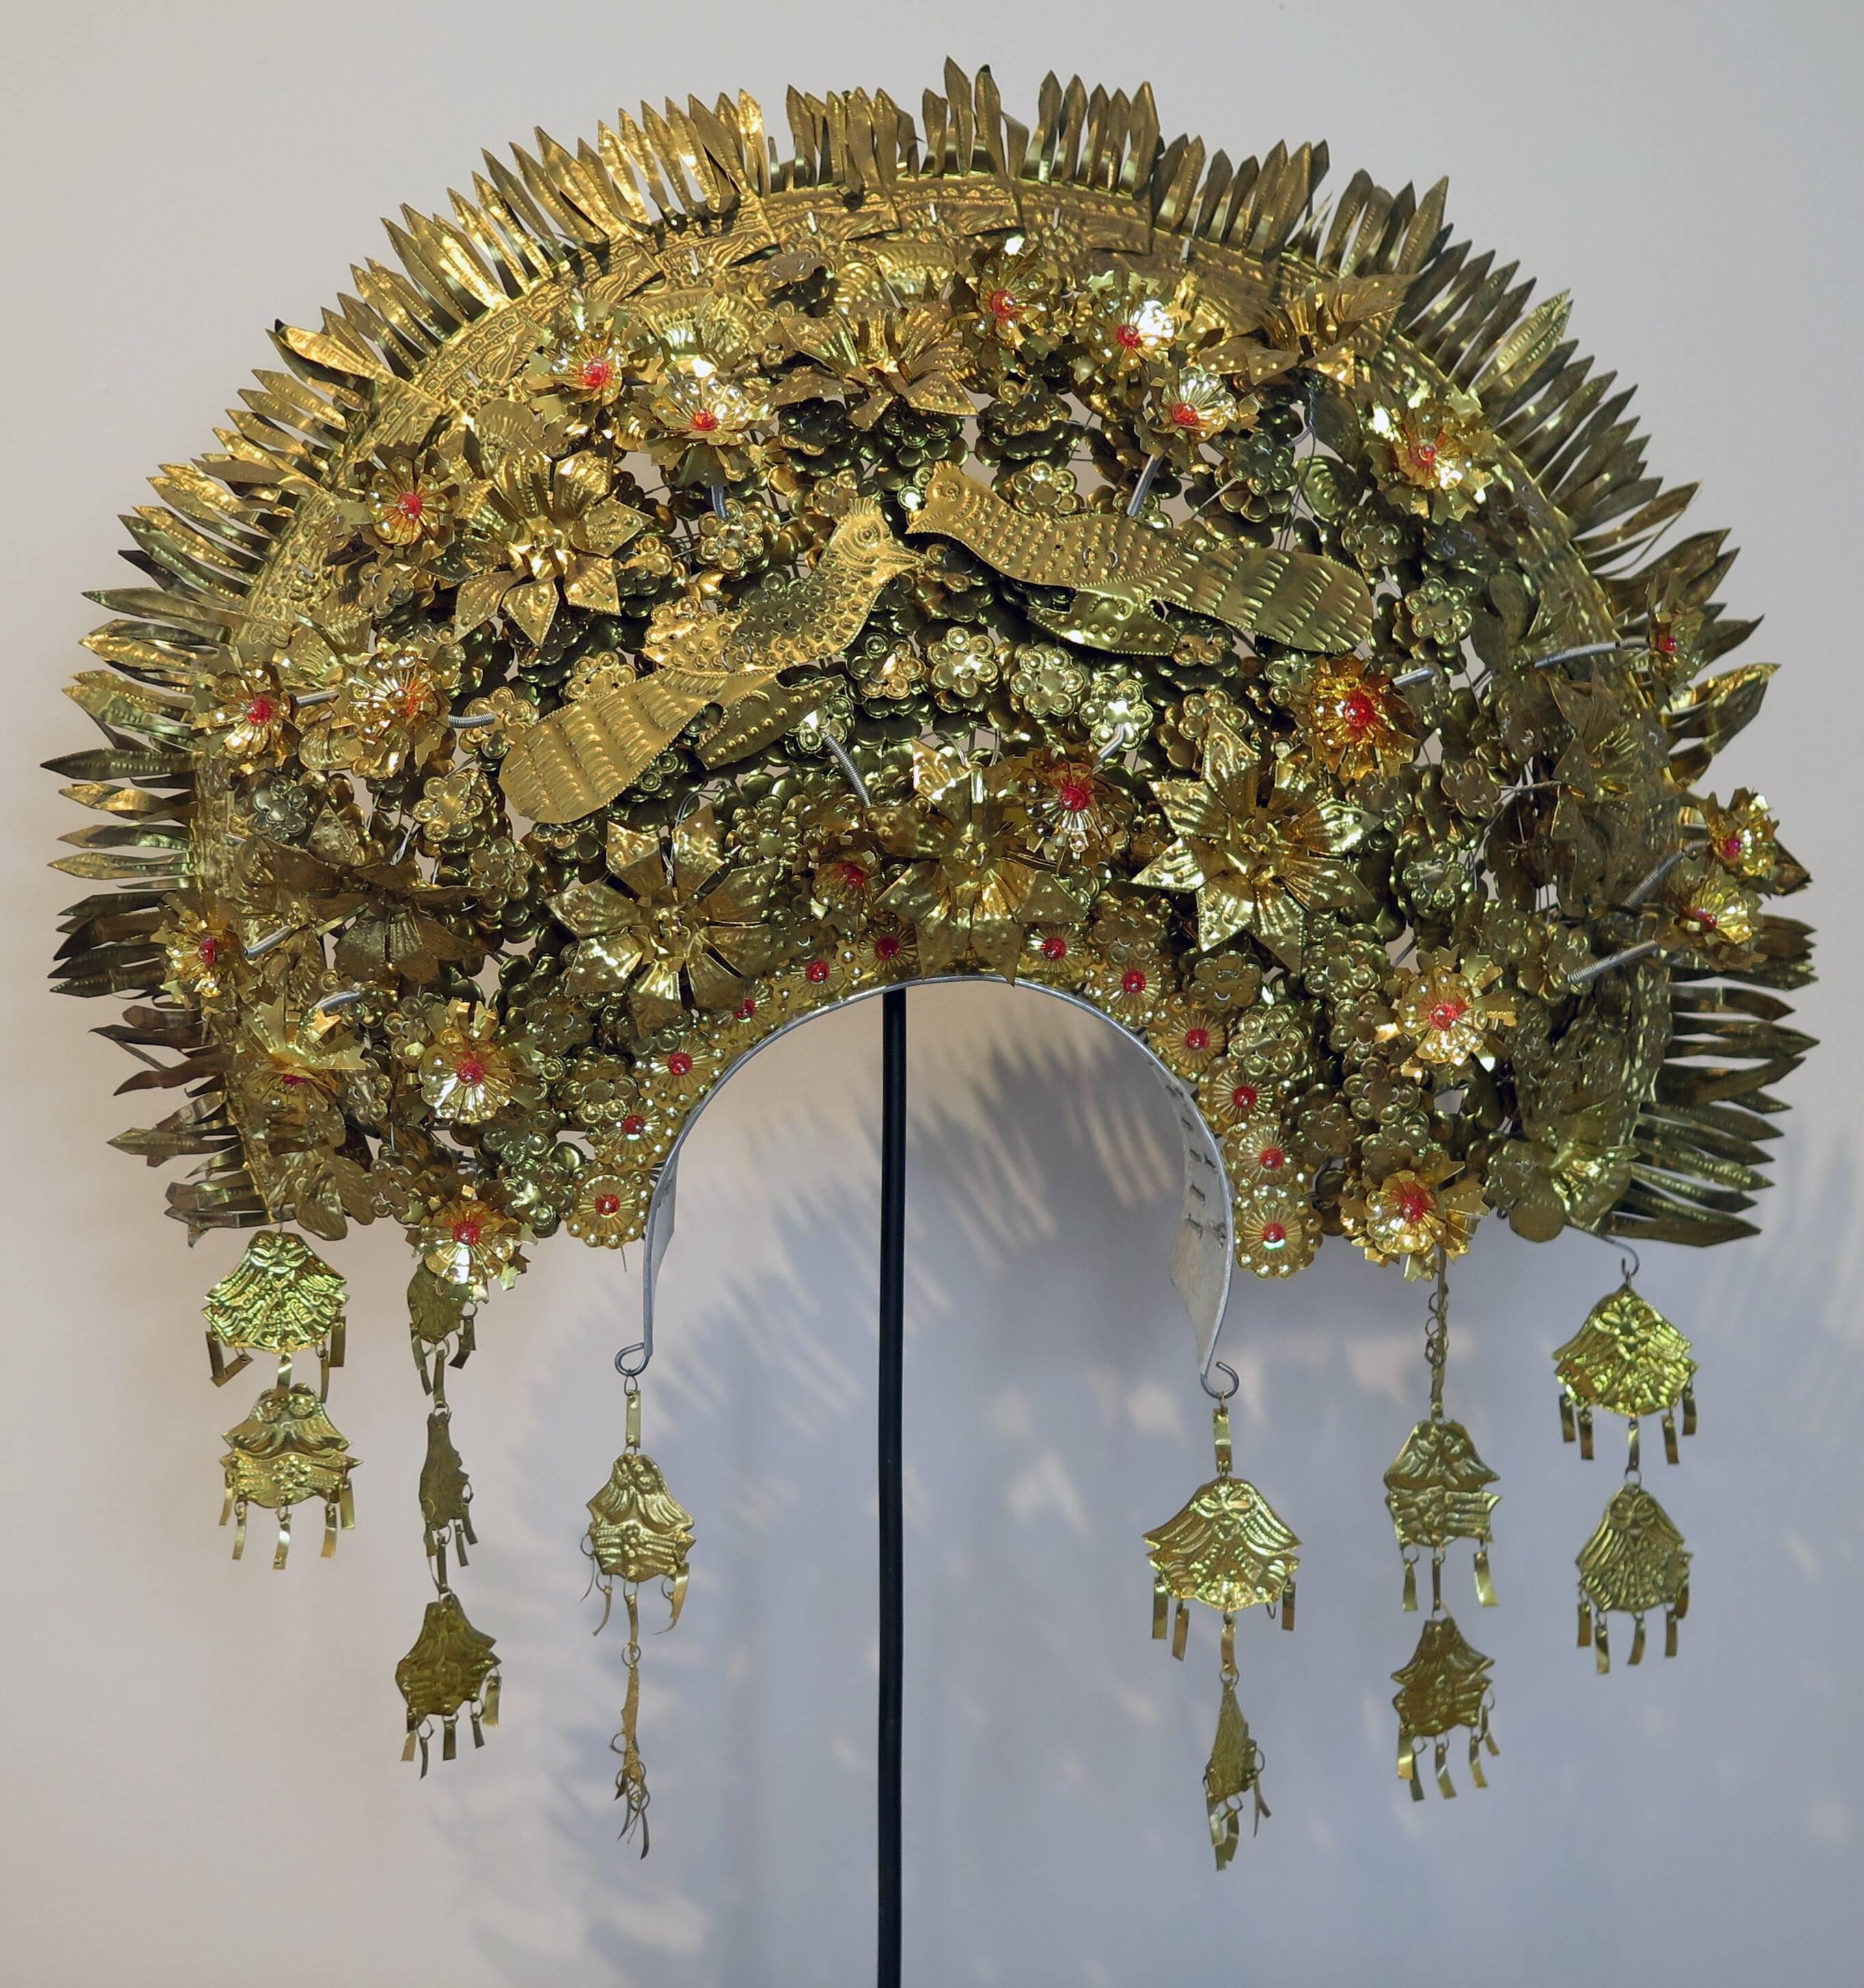 A stunning and elaborate bridal headdress from he Minangkabau peoples of Sumatra, Indonesia, circa 1960s.
This spectacular headdress is composed of hundreds of embossed gilt metal pieces masterfully joined together. Many components on springs or